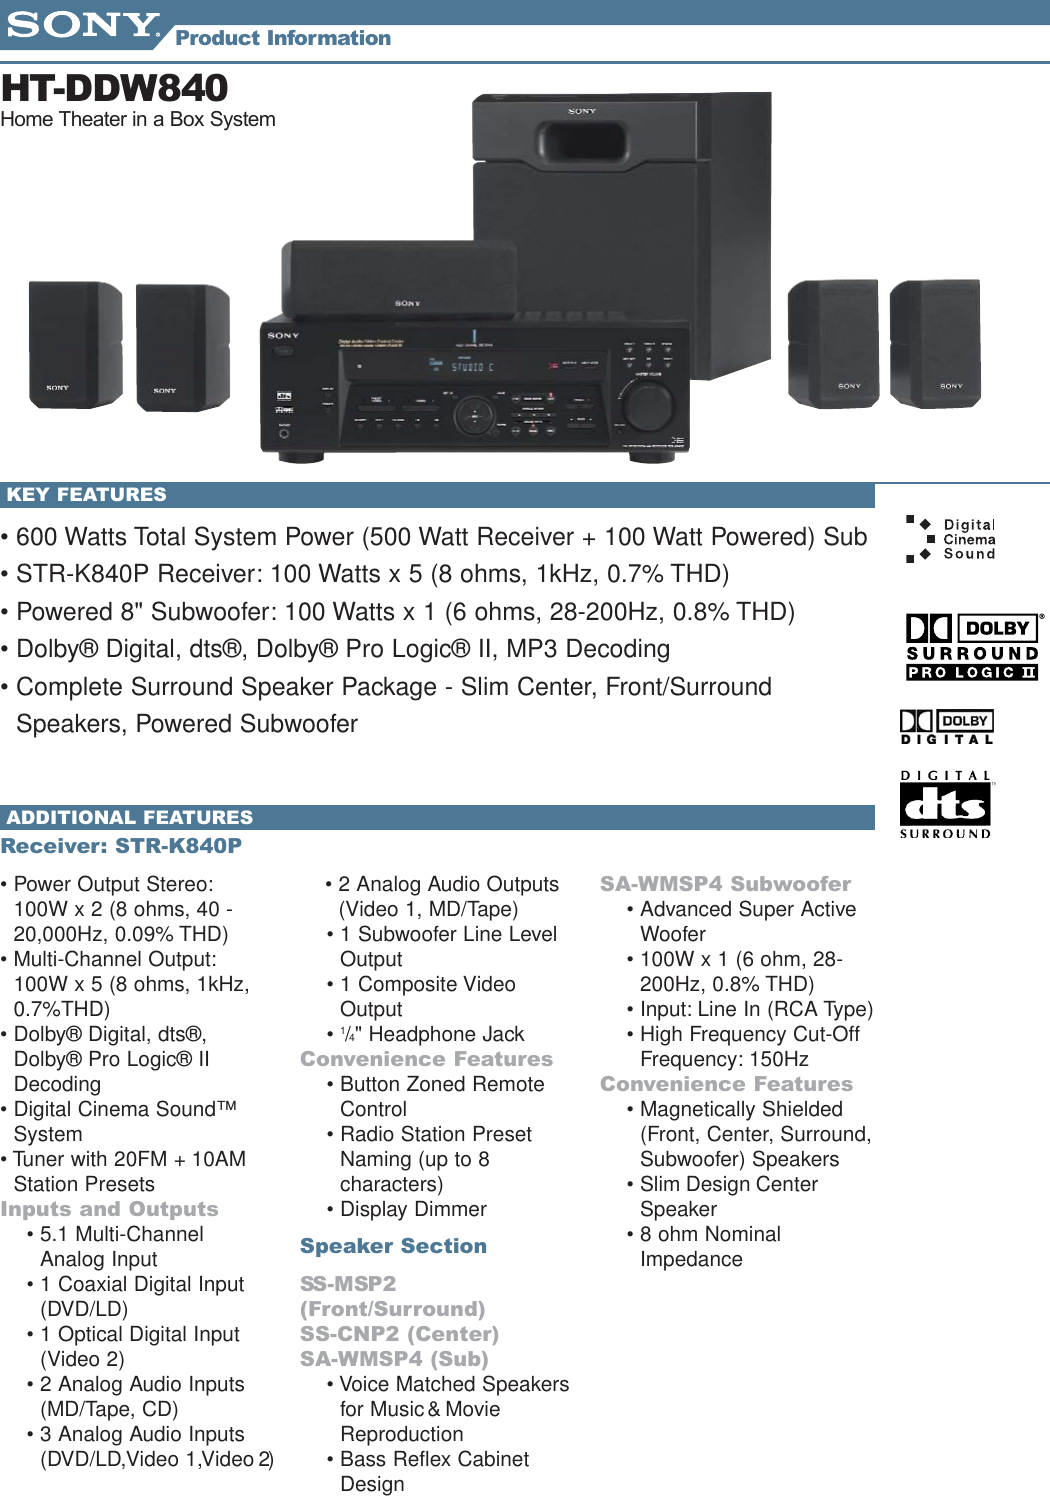 Page 1 of 2 - Sony HT-DDW840 HTIB_Info_Sheets_1 User Manual Marketing Specifications HTDDW840spec